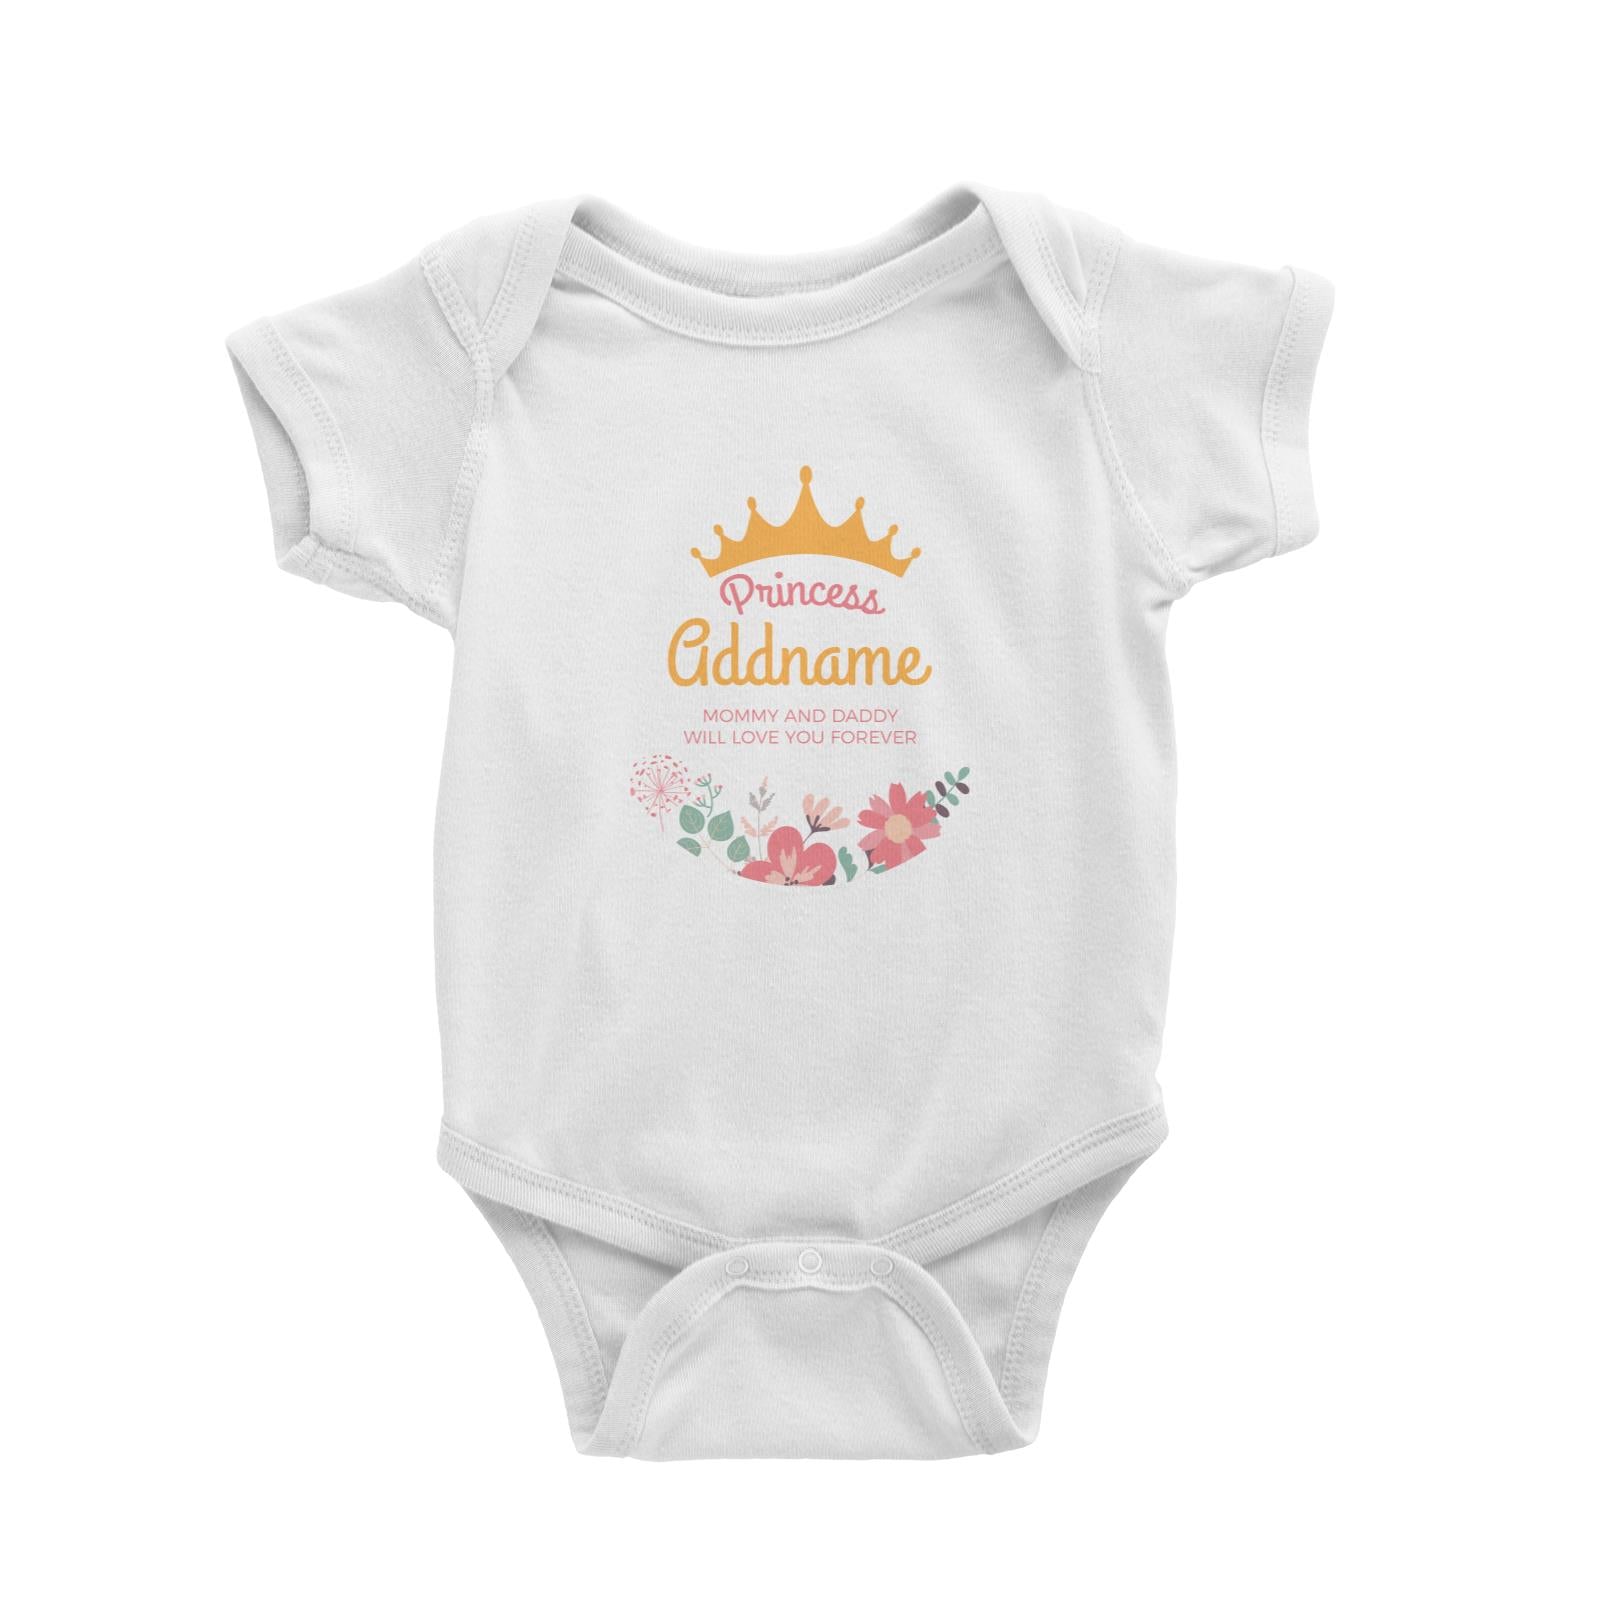 Princess with Tiara and Flowers 2 Personalizable with Name and Text Baby Romper